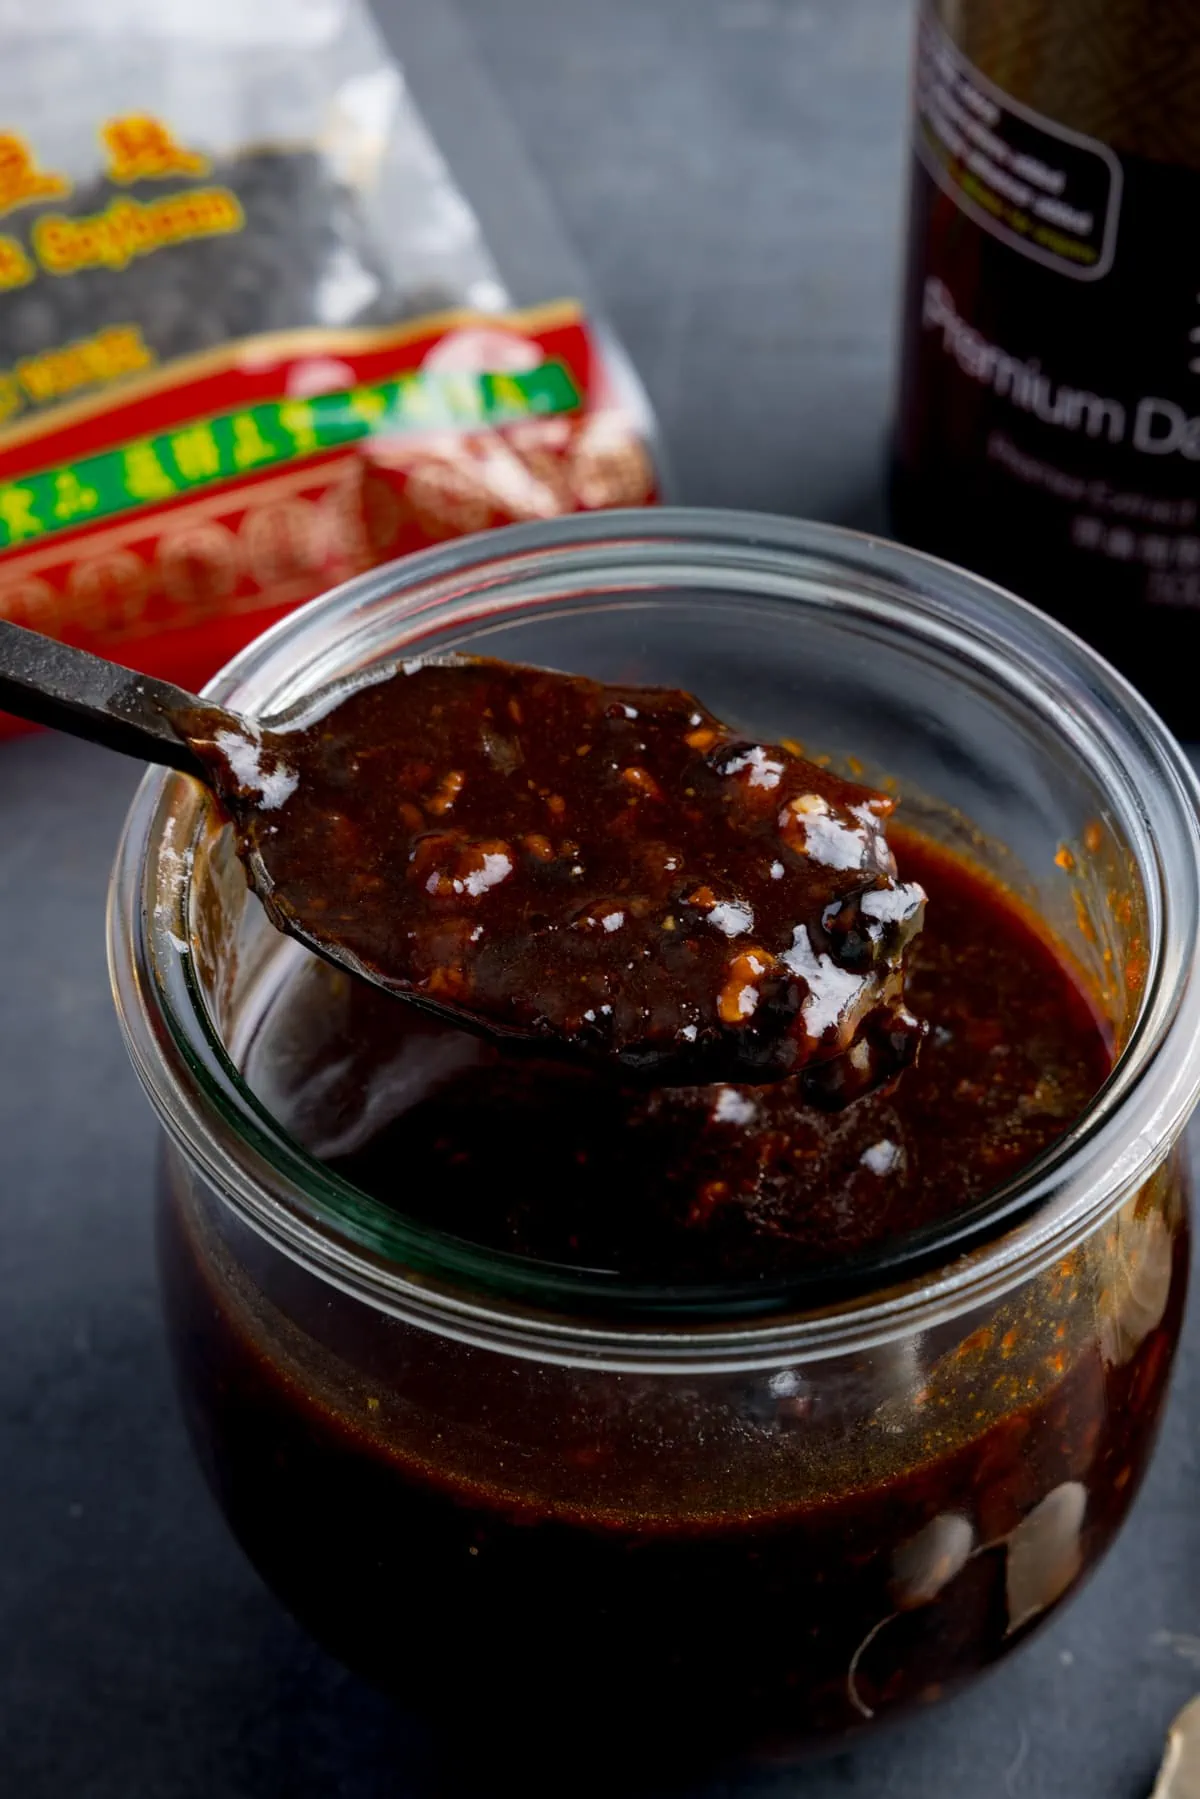 A glass jar filled with homemade black bean sauce. There is a black spoon, taking a spoonful from the jar. The jar is on a dark surface and there are ingredients in the background.